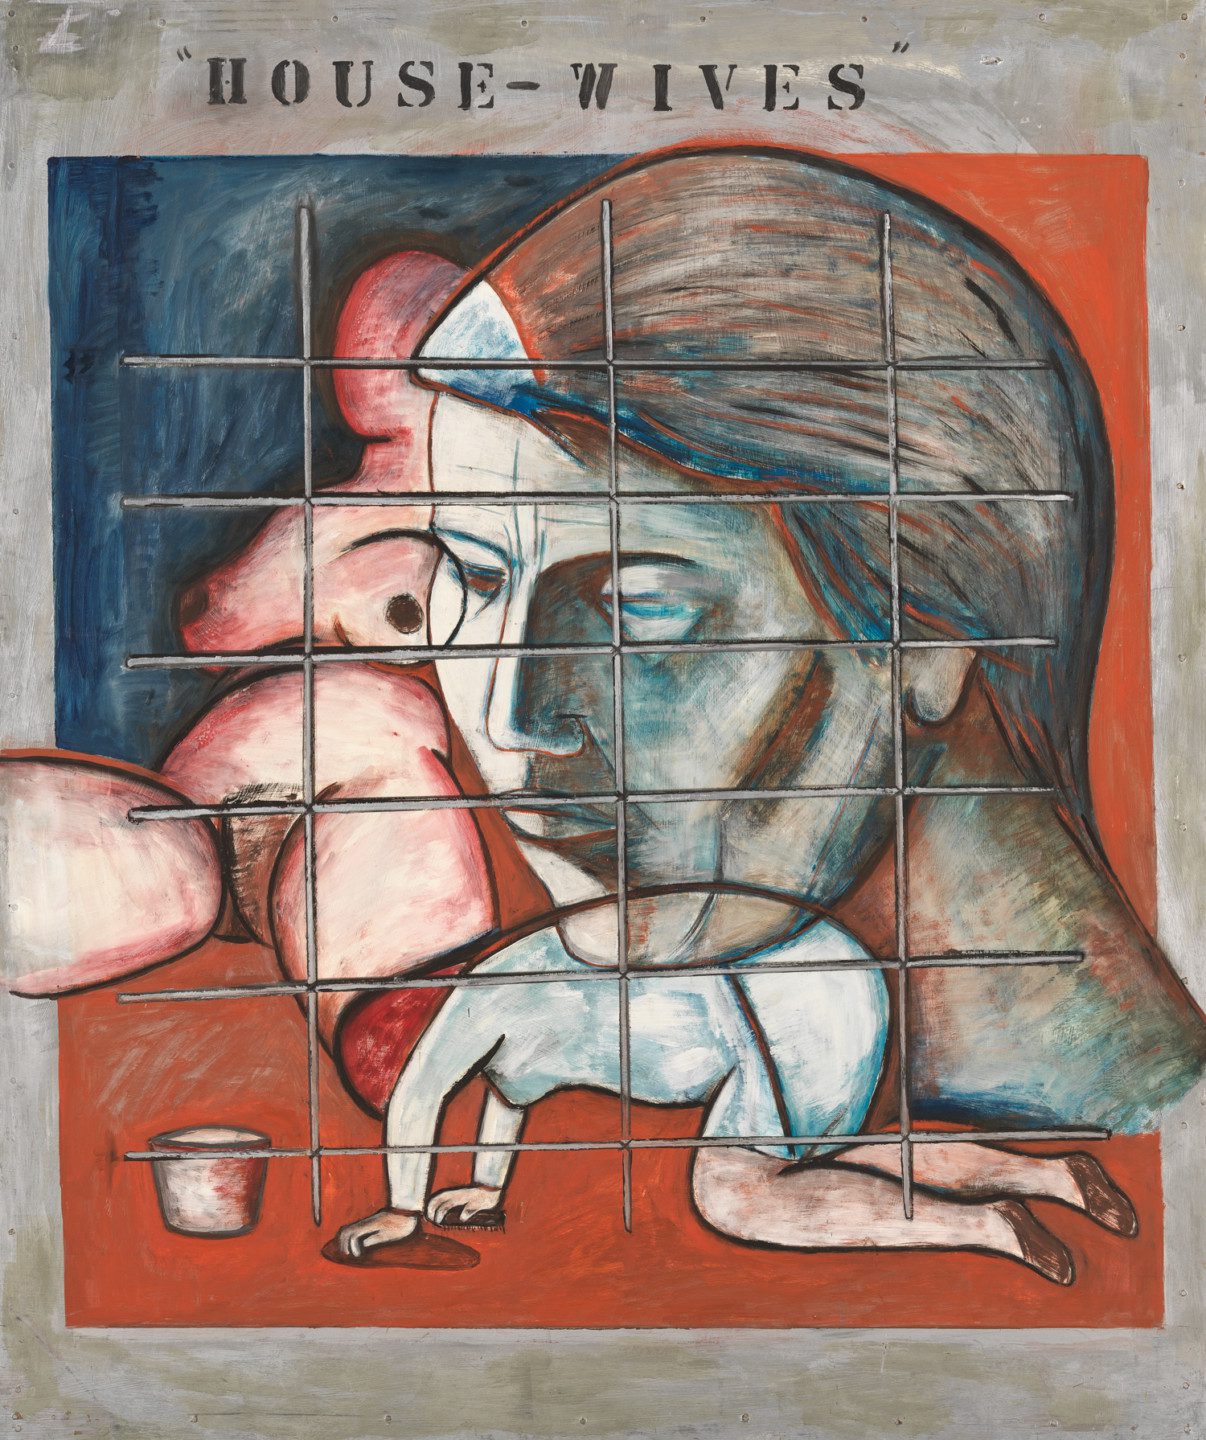  Painting. A figure is kneeling and scrubbing the floor behind a grate. Behind the grille is also a large female head and a reclining female figure.